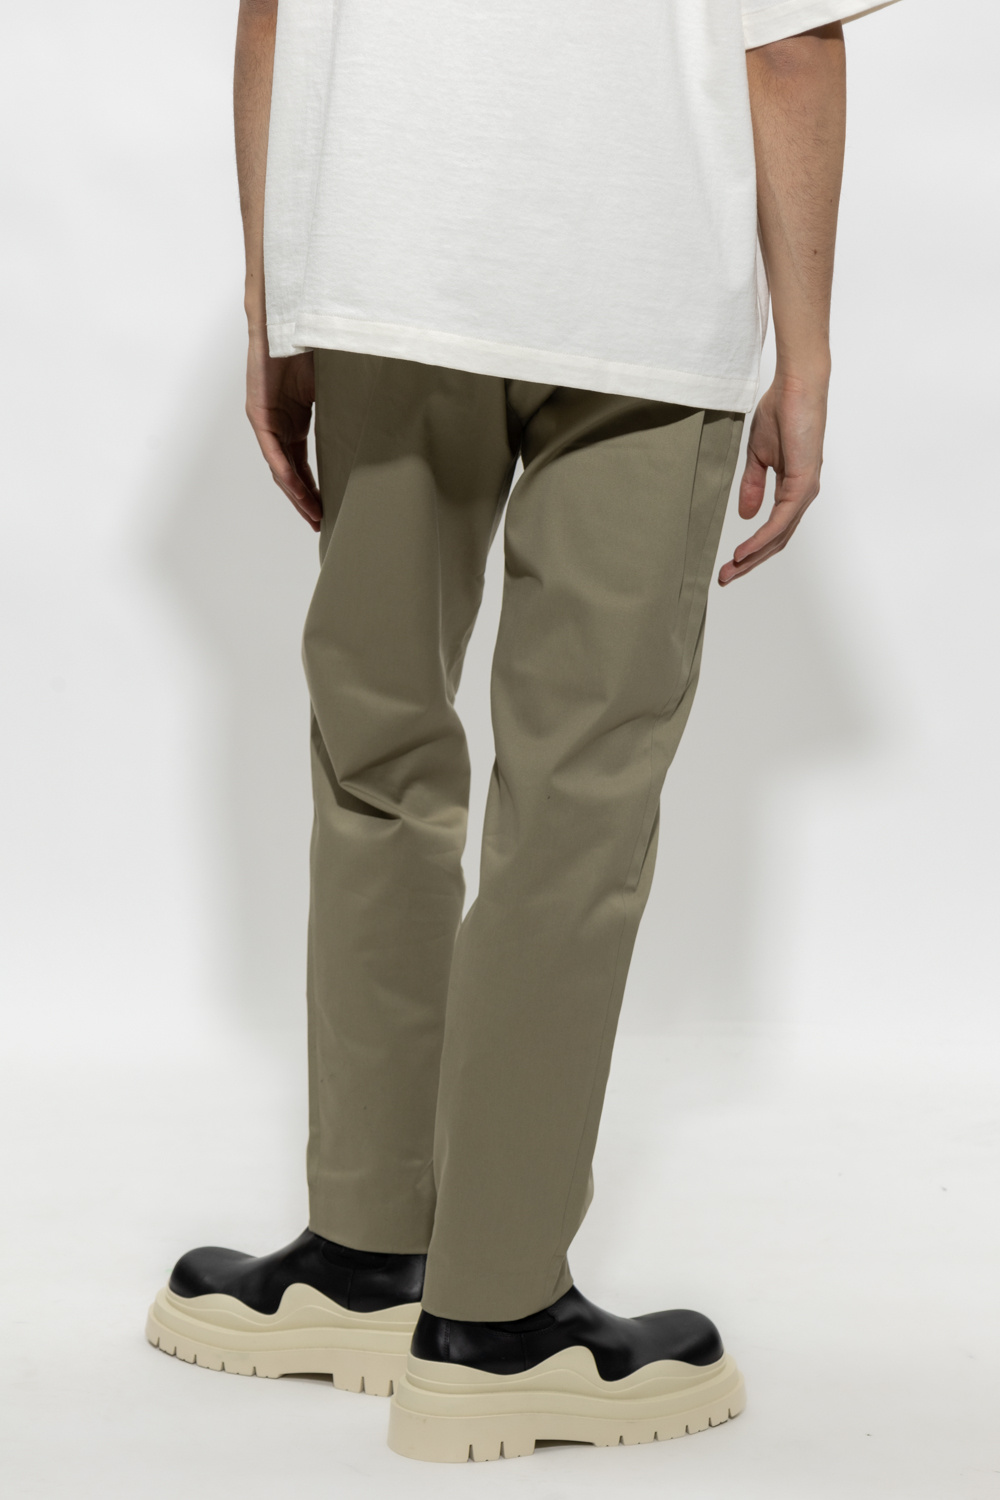 Paul Smith Pleat-front Polo trousers